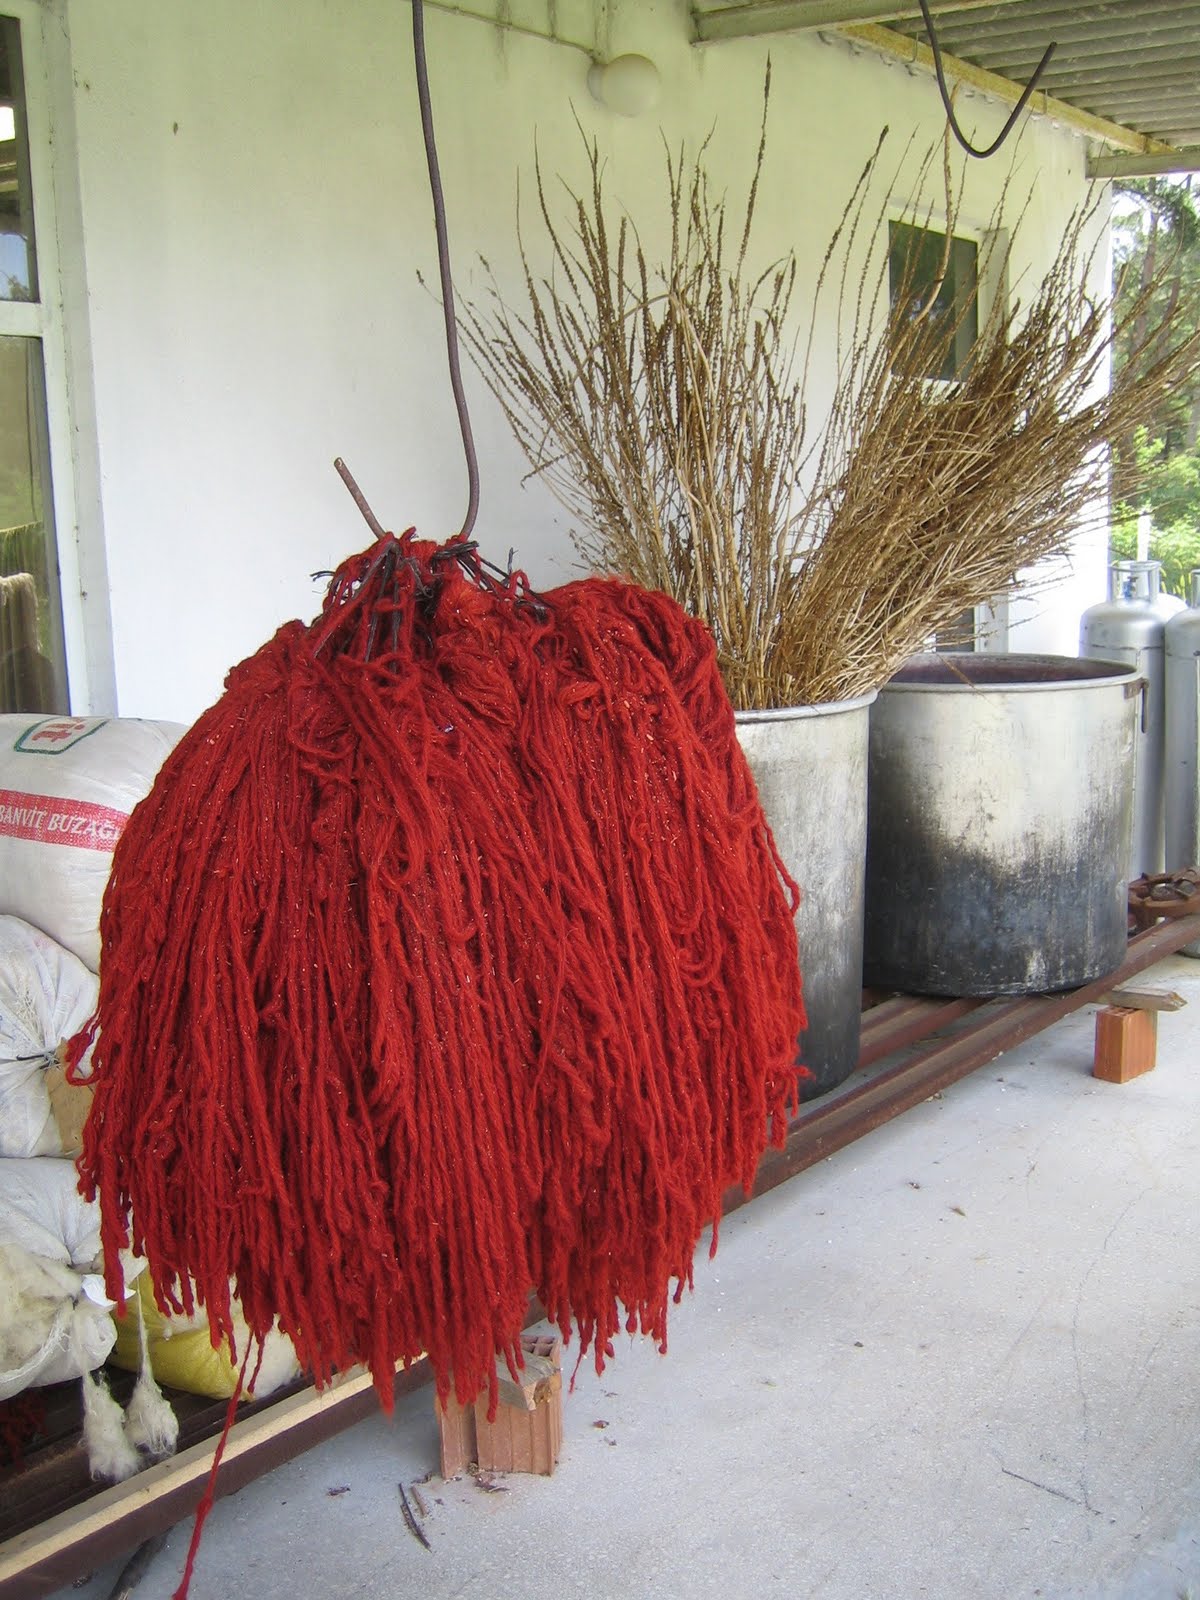 Red yarns dyed with madder root, Örselli, Manisa, Western Turkey, 2007